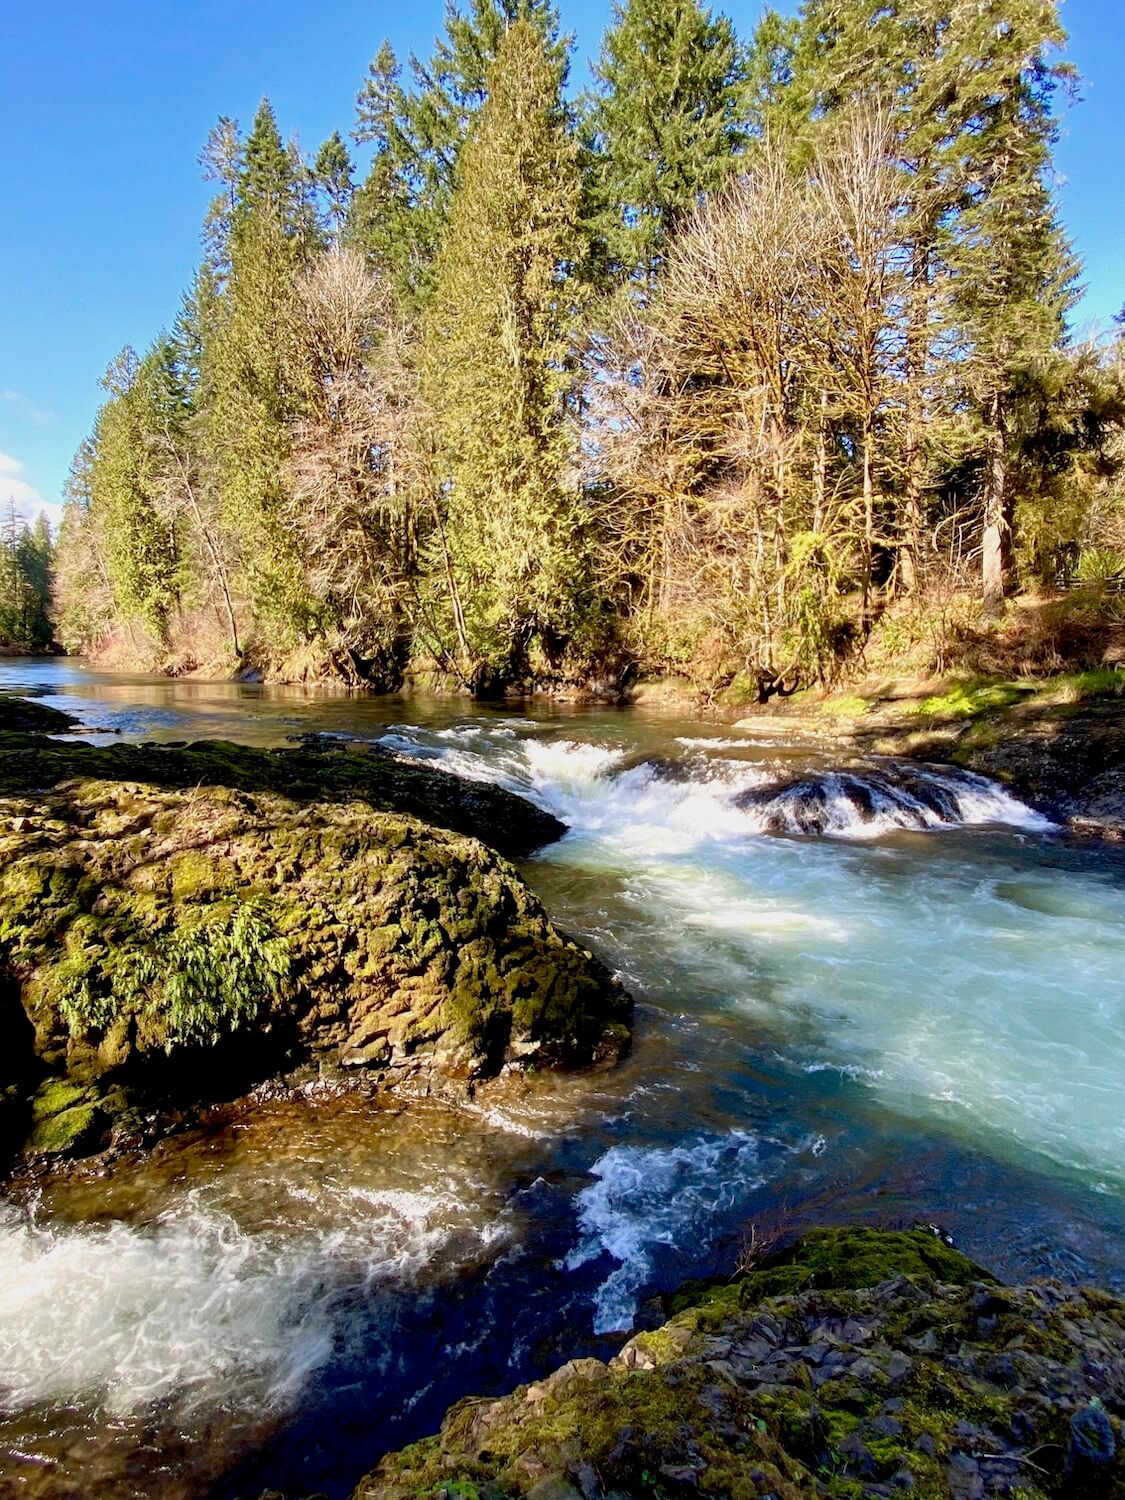 Rainbow Falls State Park makes a great day trip from Seattle. Rushing waters flow over moss covered rocks with dormant fir trees lining the wild Chehalis River.